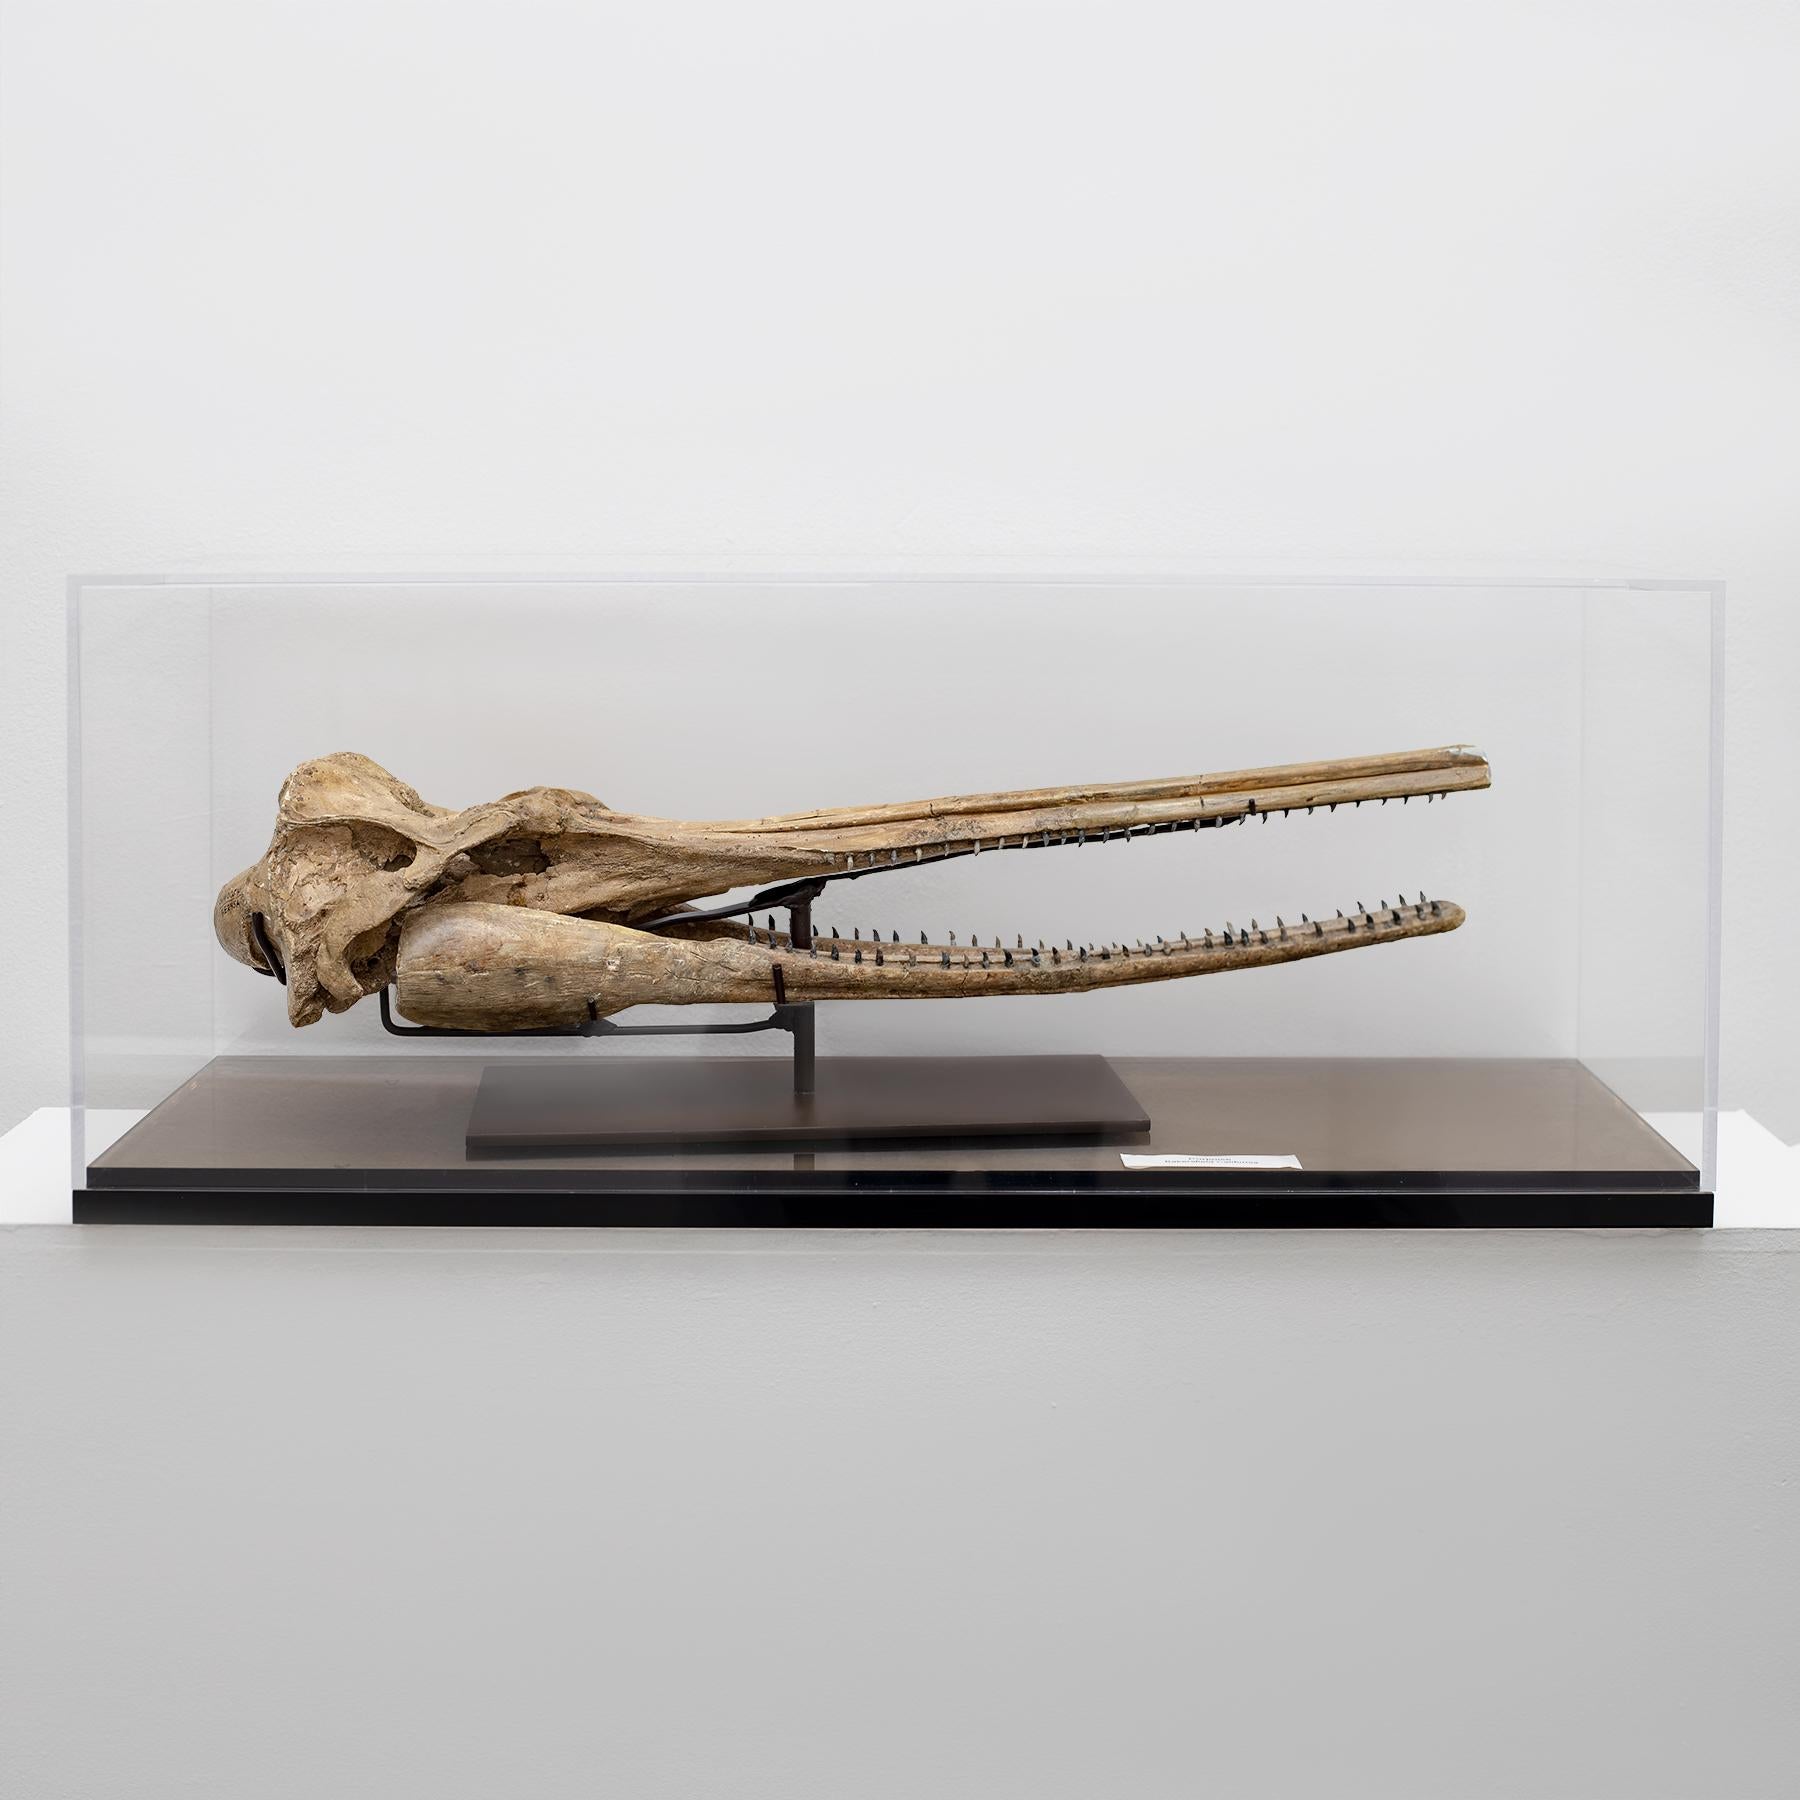 Dolphin Fossil Skull
Porpoise Bakersfield California
Miocene Period (15 Million Years Old) 
in Acrylic custom case

Porpoise, is a group of aquatic mammals similar appearance to the dolphins. They are, however, more closely related to narwhals